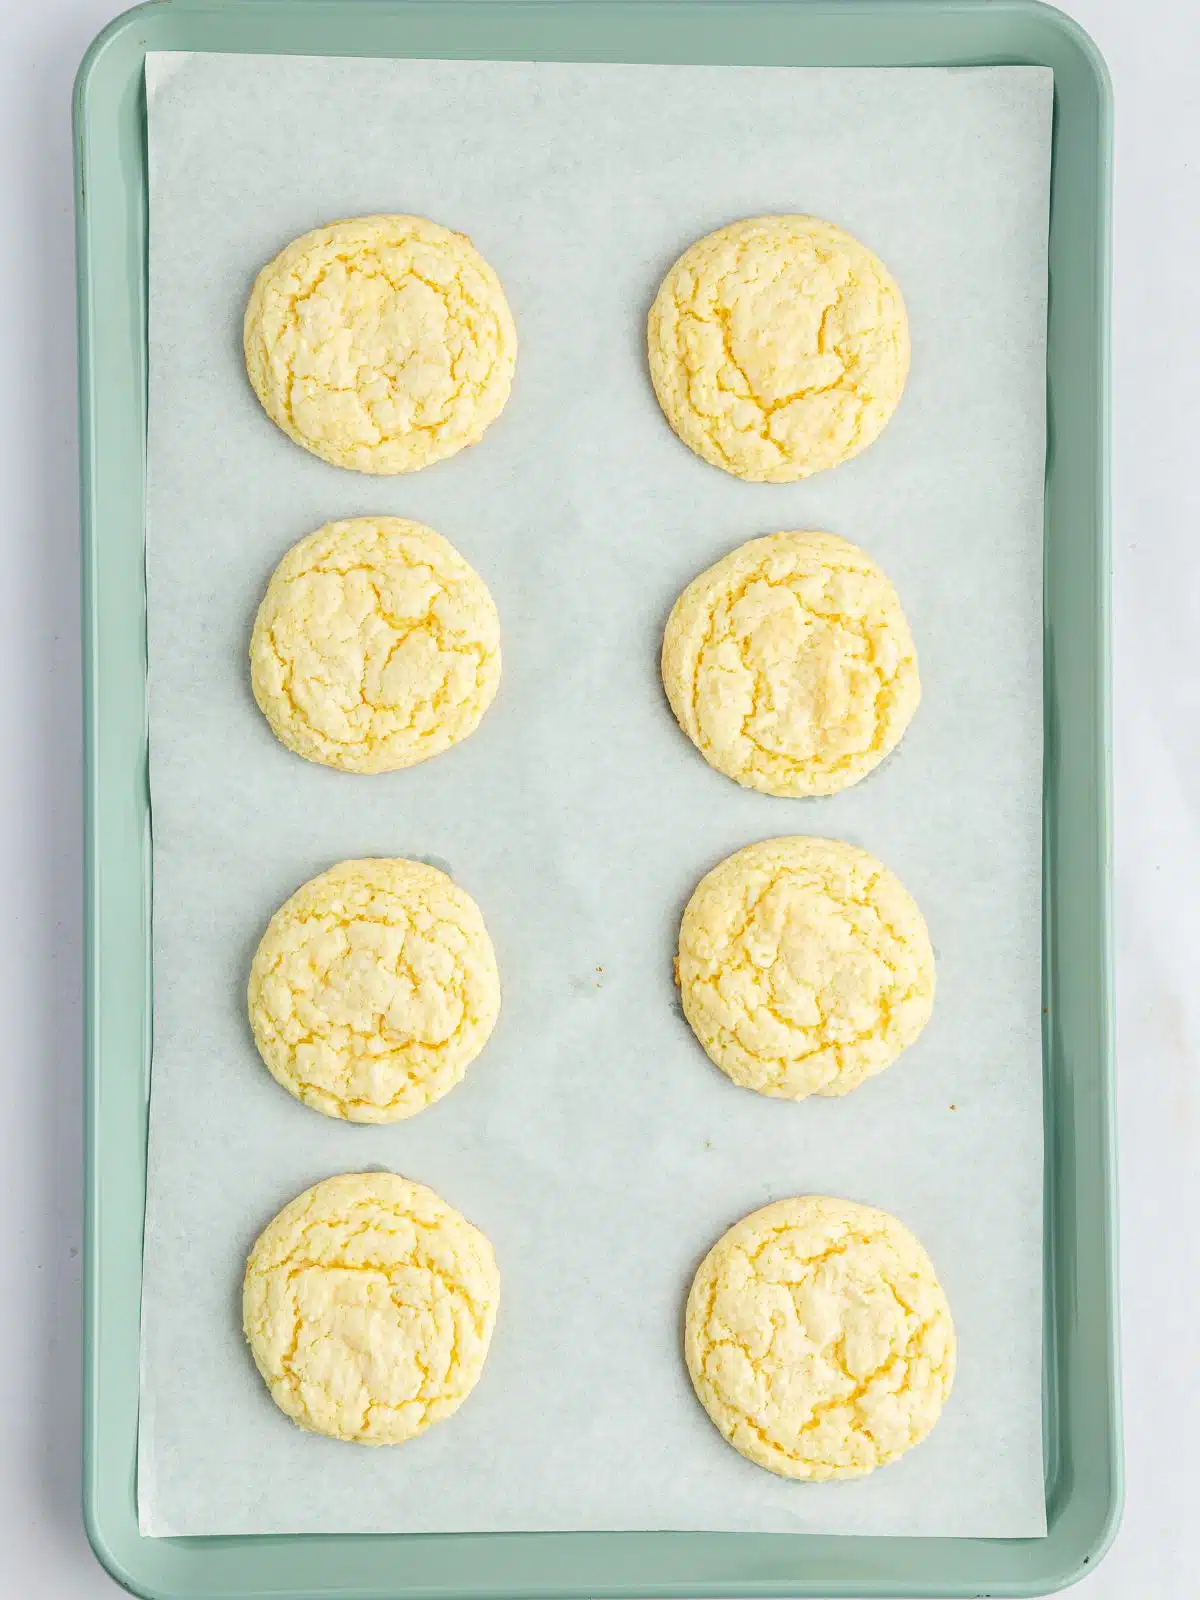 baked cake mix cookies on tray.